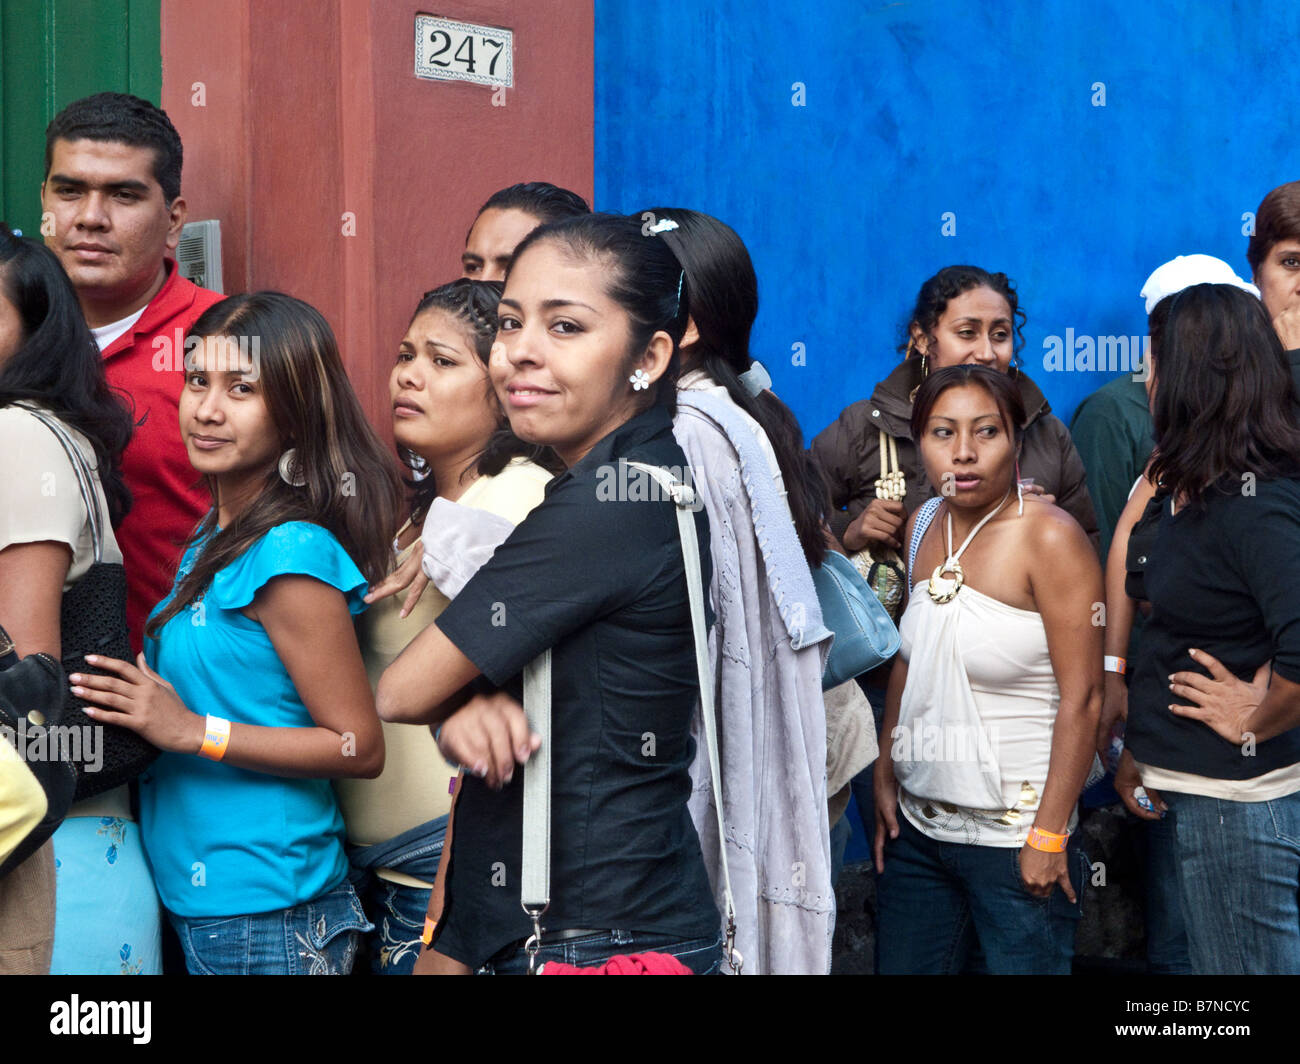 a good-natured crowd of young Mexicans waits to enter the Frida Kahlo museum 'Casa Azul' in the Coyoacan district, Mexico City Stock Photo